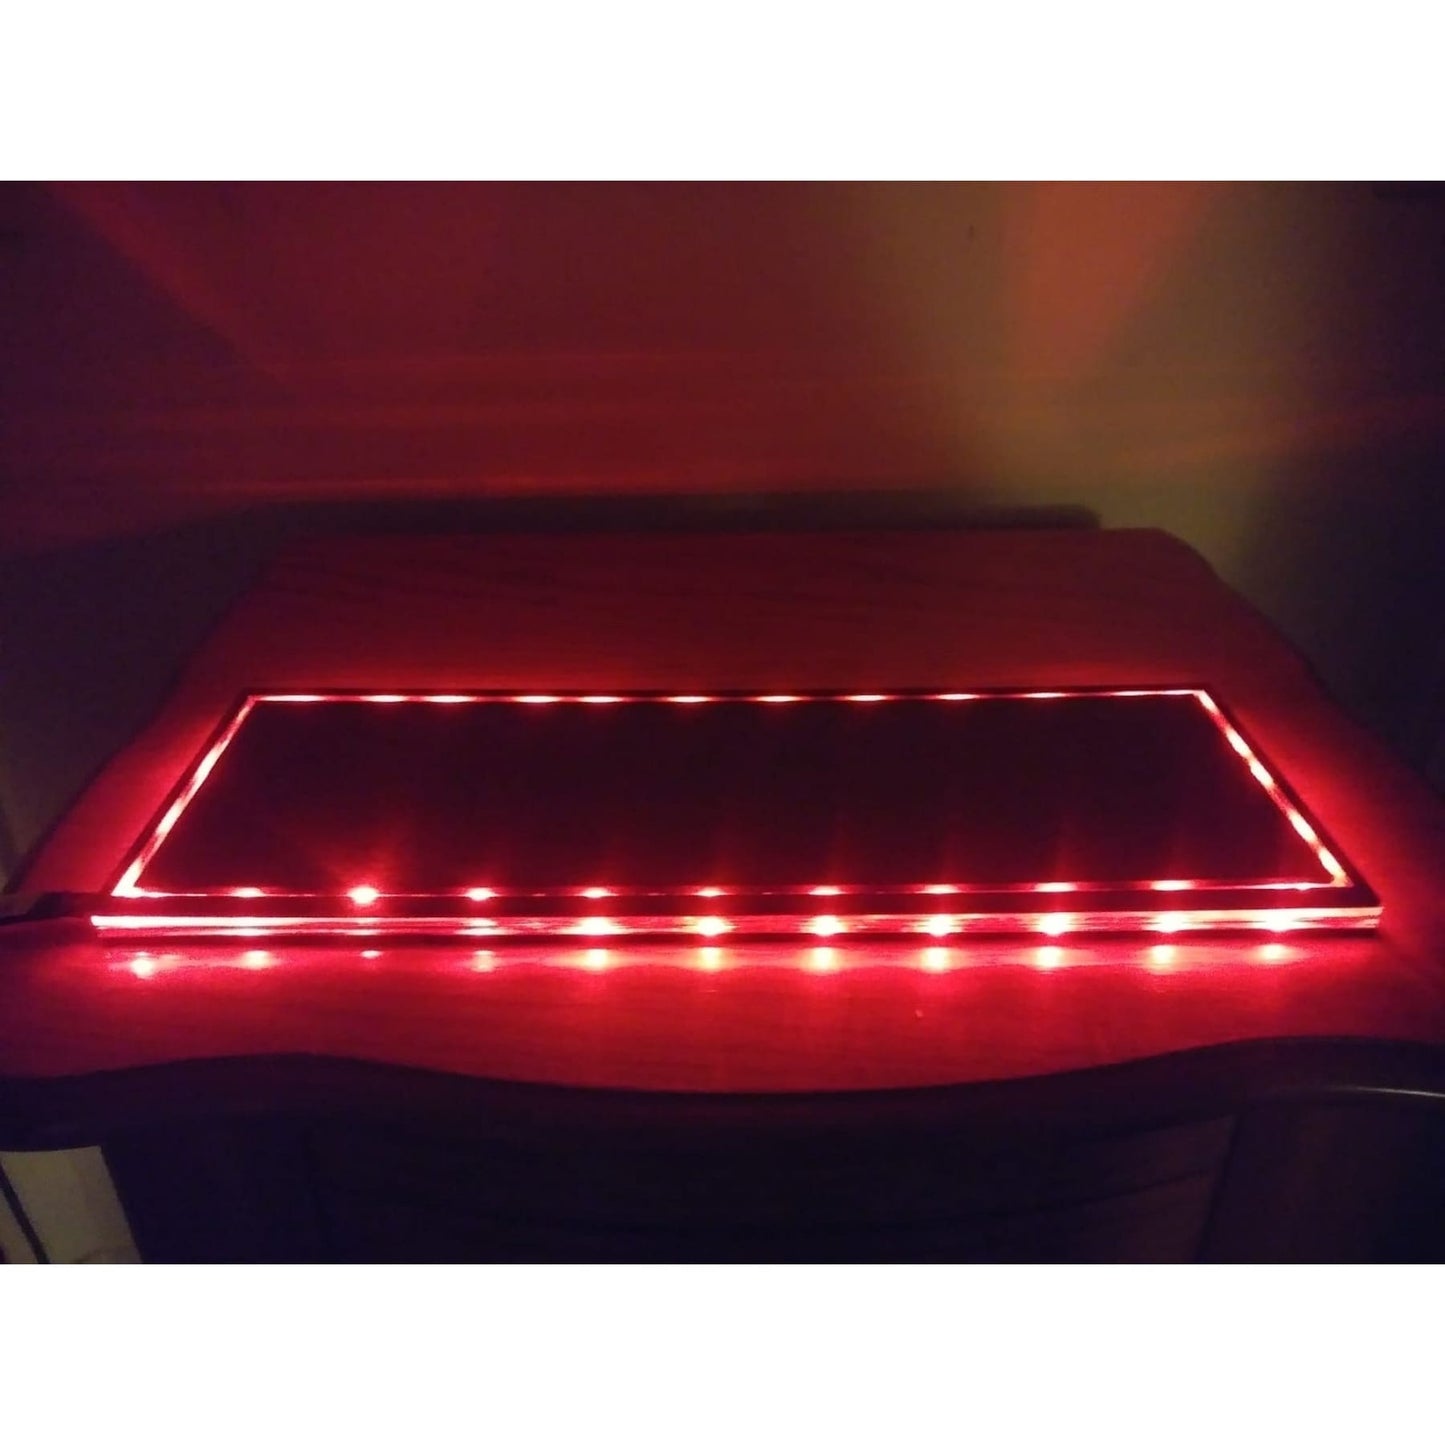 Display Base with LED, any size for Collectibles Lighting Ambient